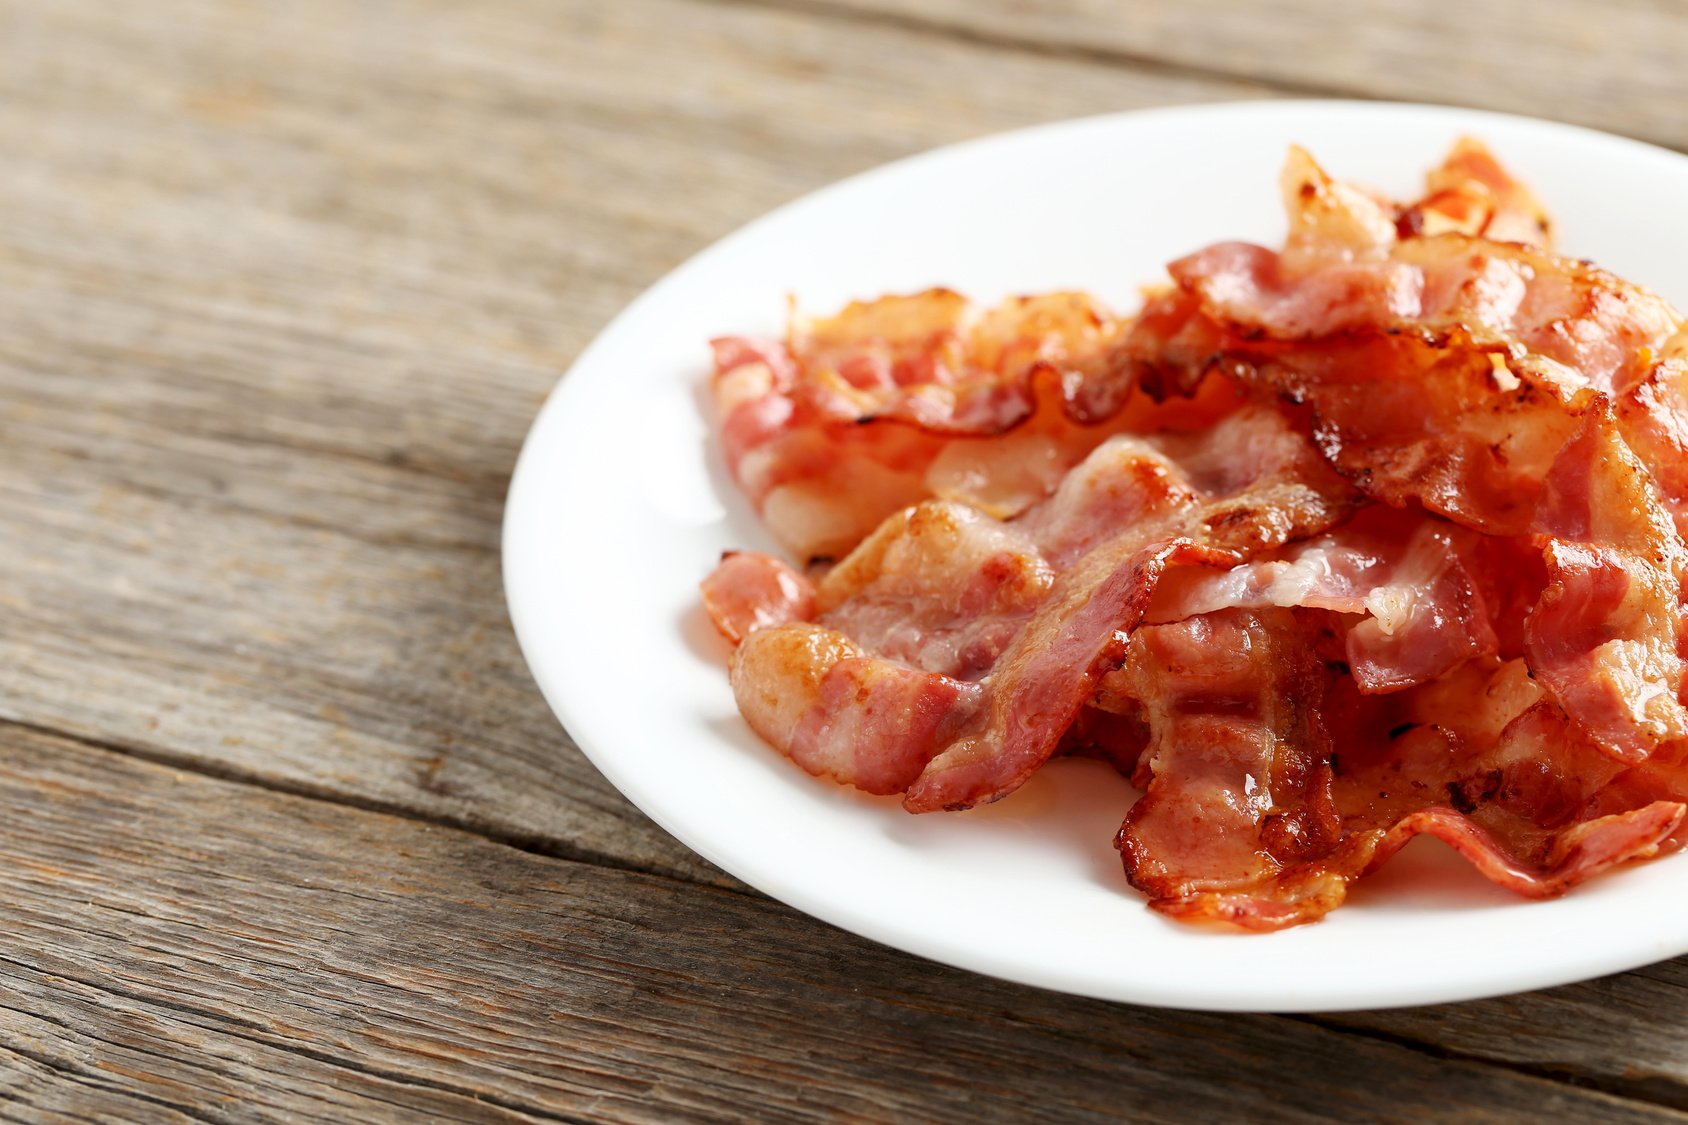 Crispy strips of bacon on a grey wooden background